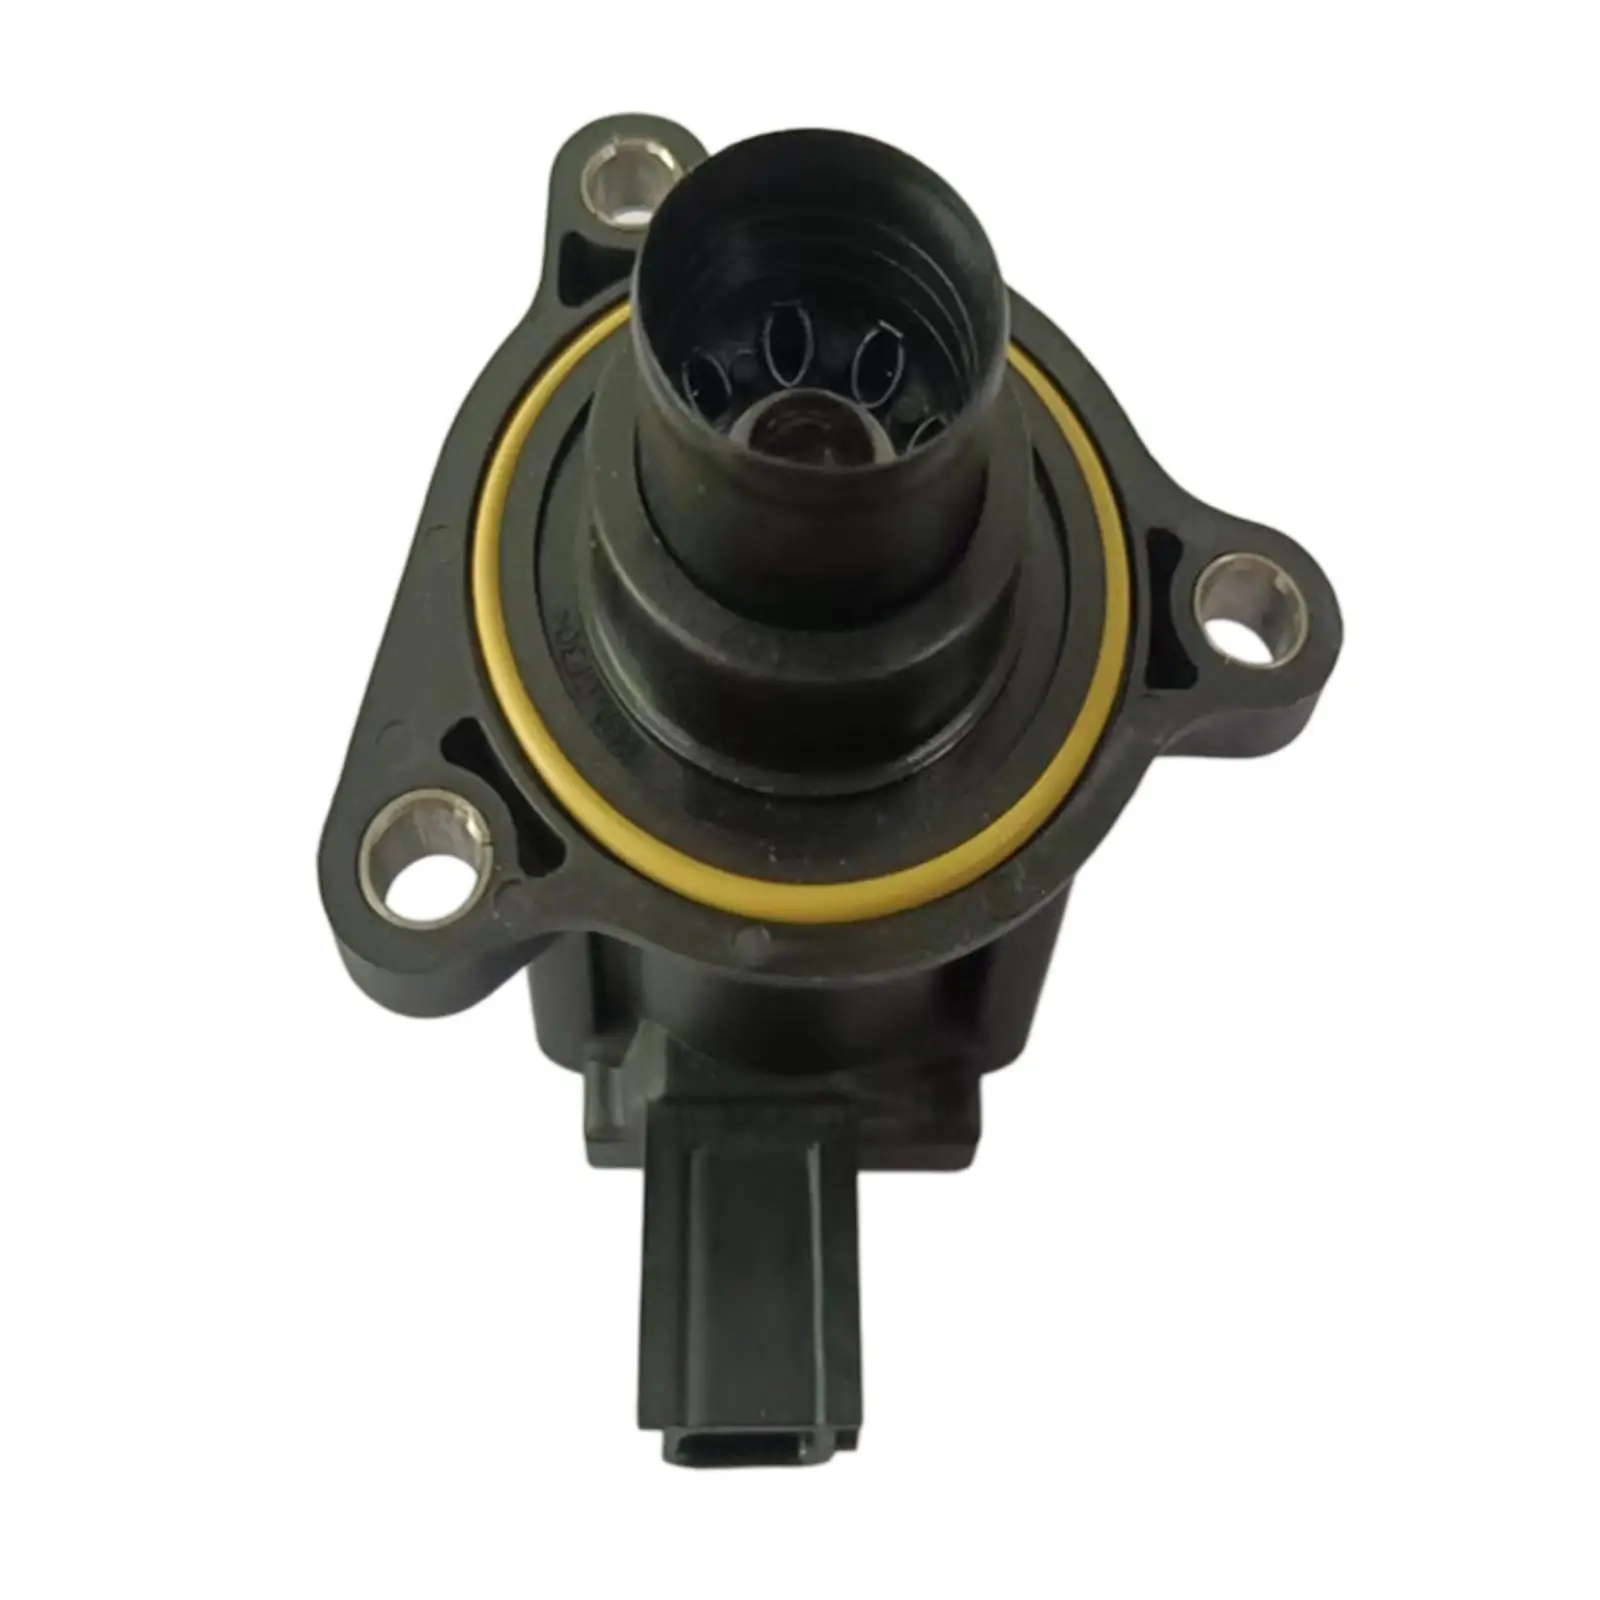 Turbocharger Solenoid Valve Direct Replaces for Renault 1.2 Models